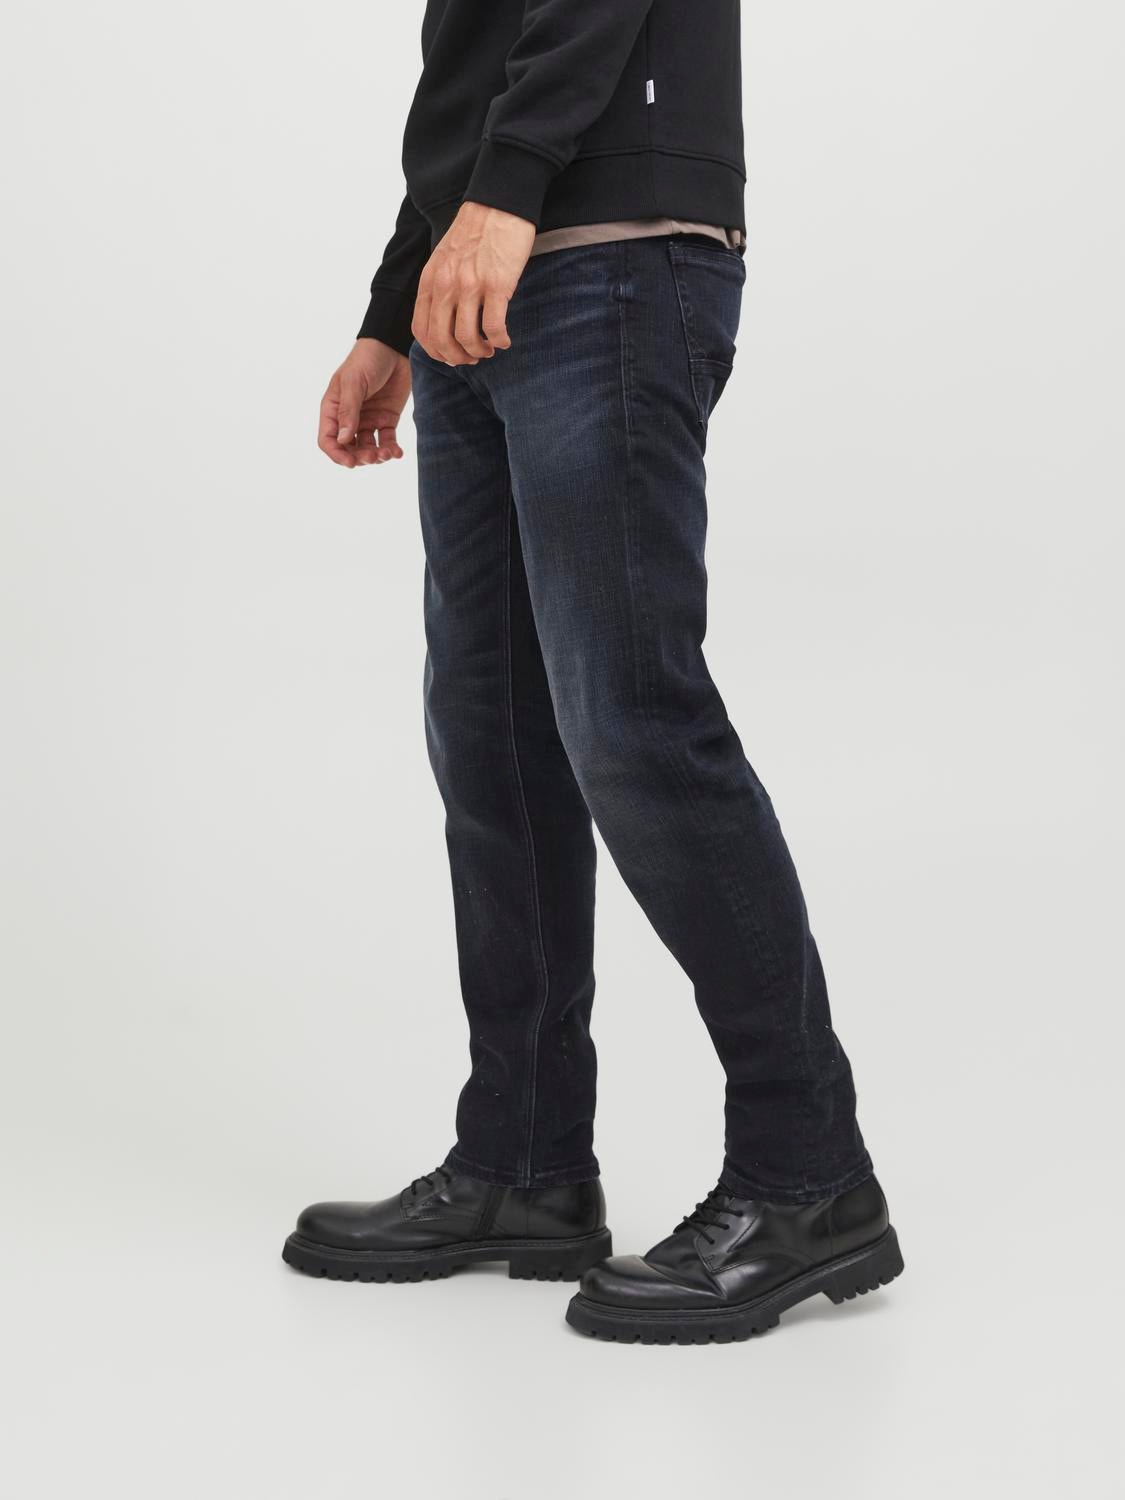 JJIMIKE JJWOOD JJ 781 SN Tapered fit jeans with 20% discount!